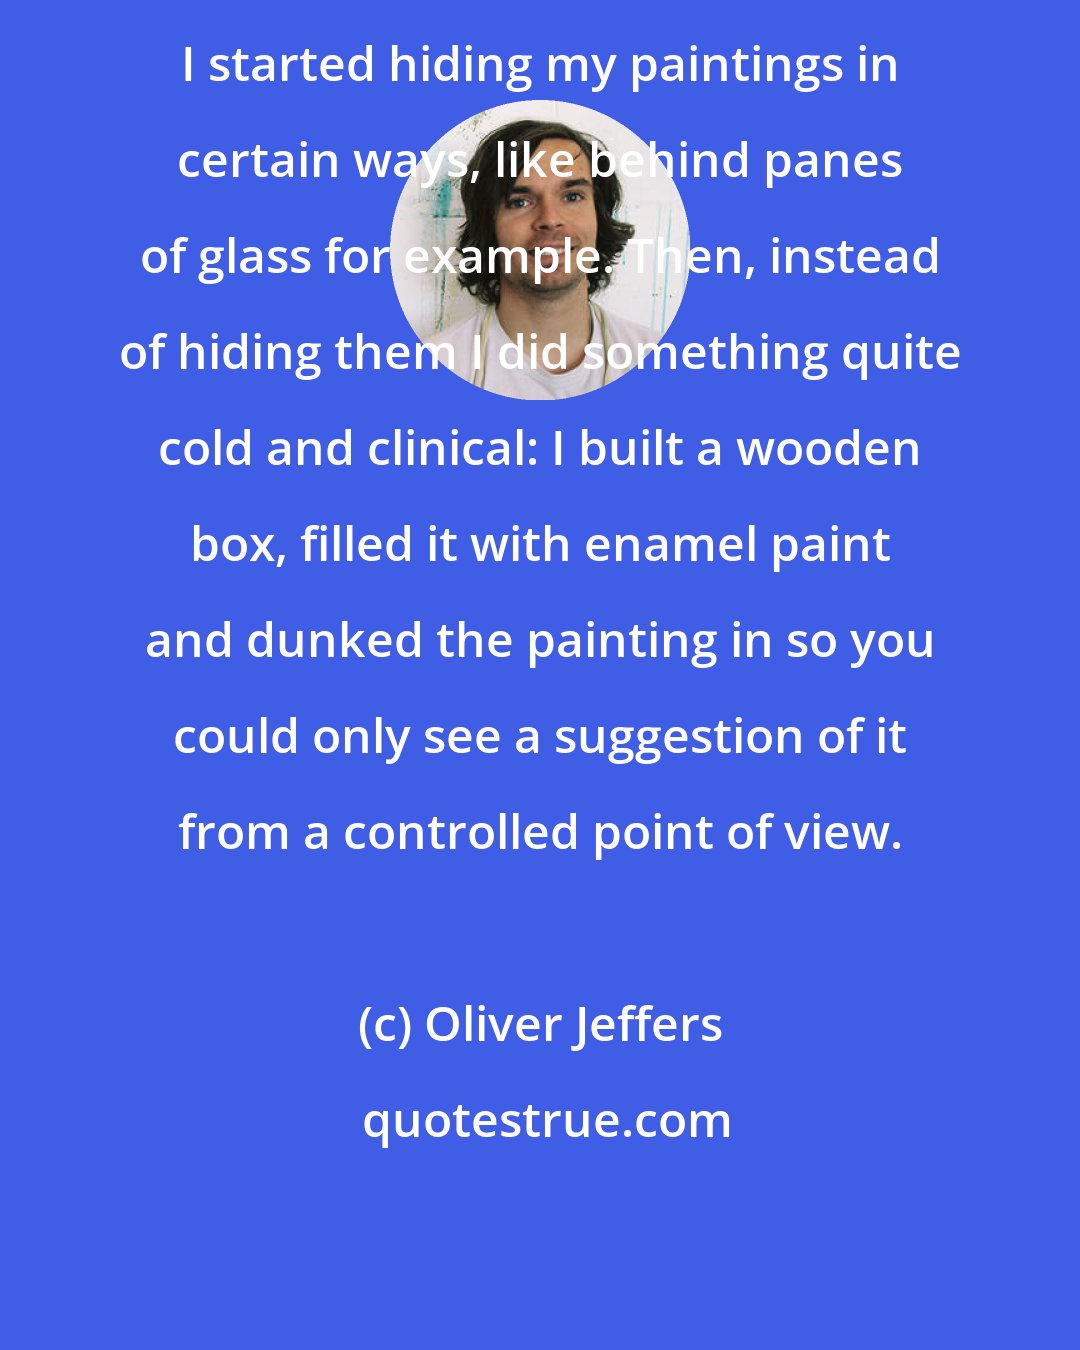 Oliver Jeffers: I started hiding my paintings in certain ways, like behind panes of glass for example. Then, instead of hiding them I did something quite cold and clinical: I built a wooden box, filled it with enamel paint and dunked the painting in so you could only see a suggestion of it from a controlled point of view.